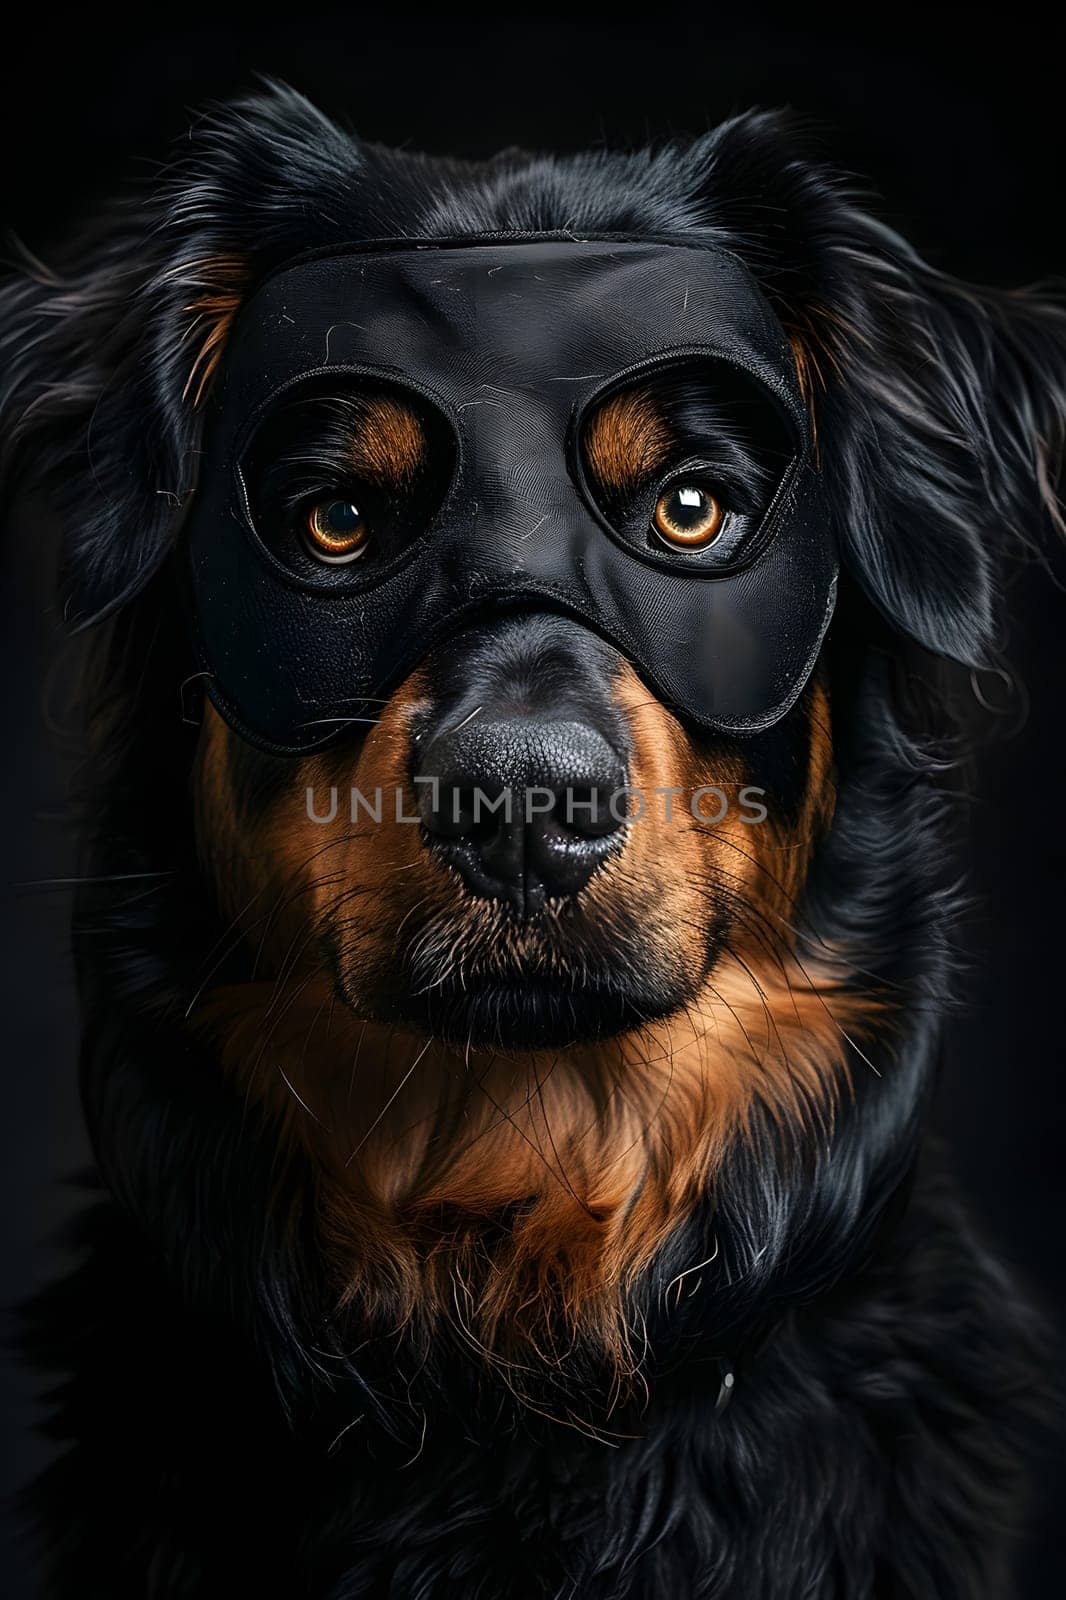 A close up of a Carnivore, Terrestrial animal wearing a black mask. This Dog breed, a Sporting Group member, is a companion and working animal with a liver snout and whiskers